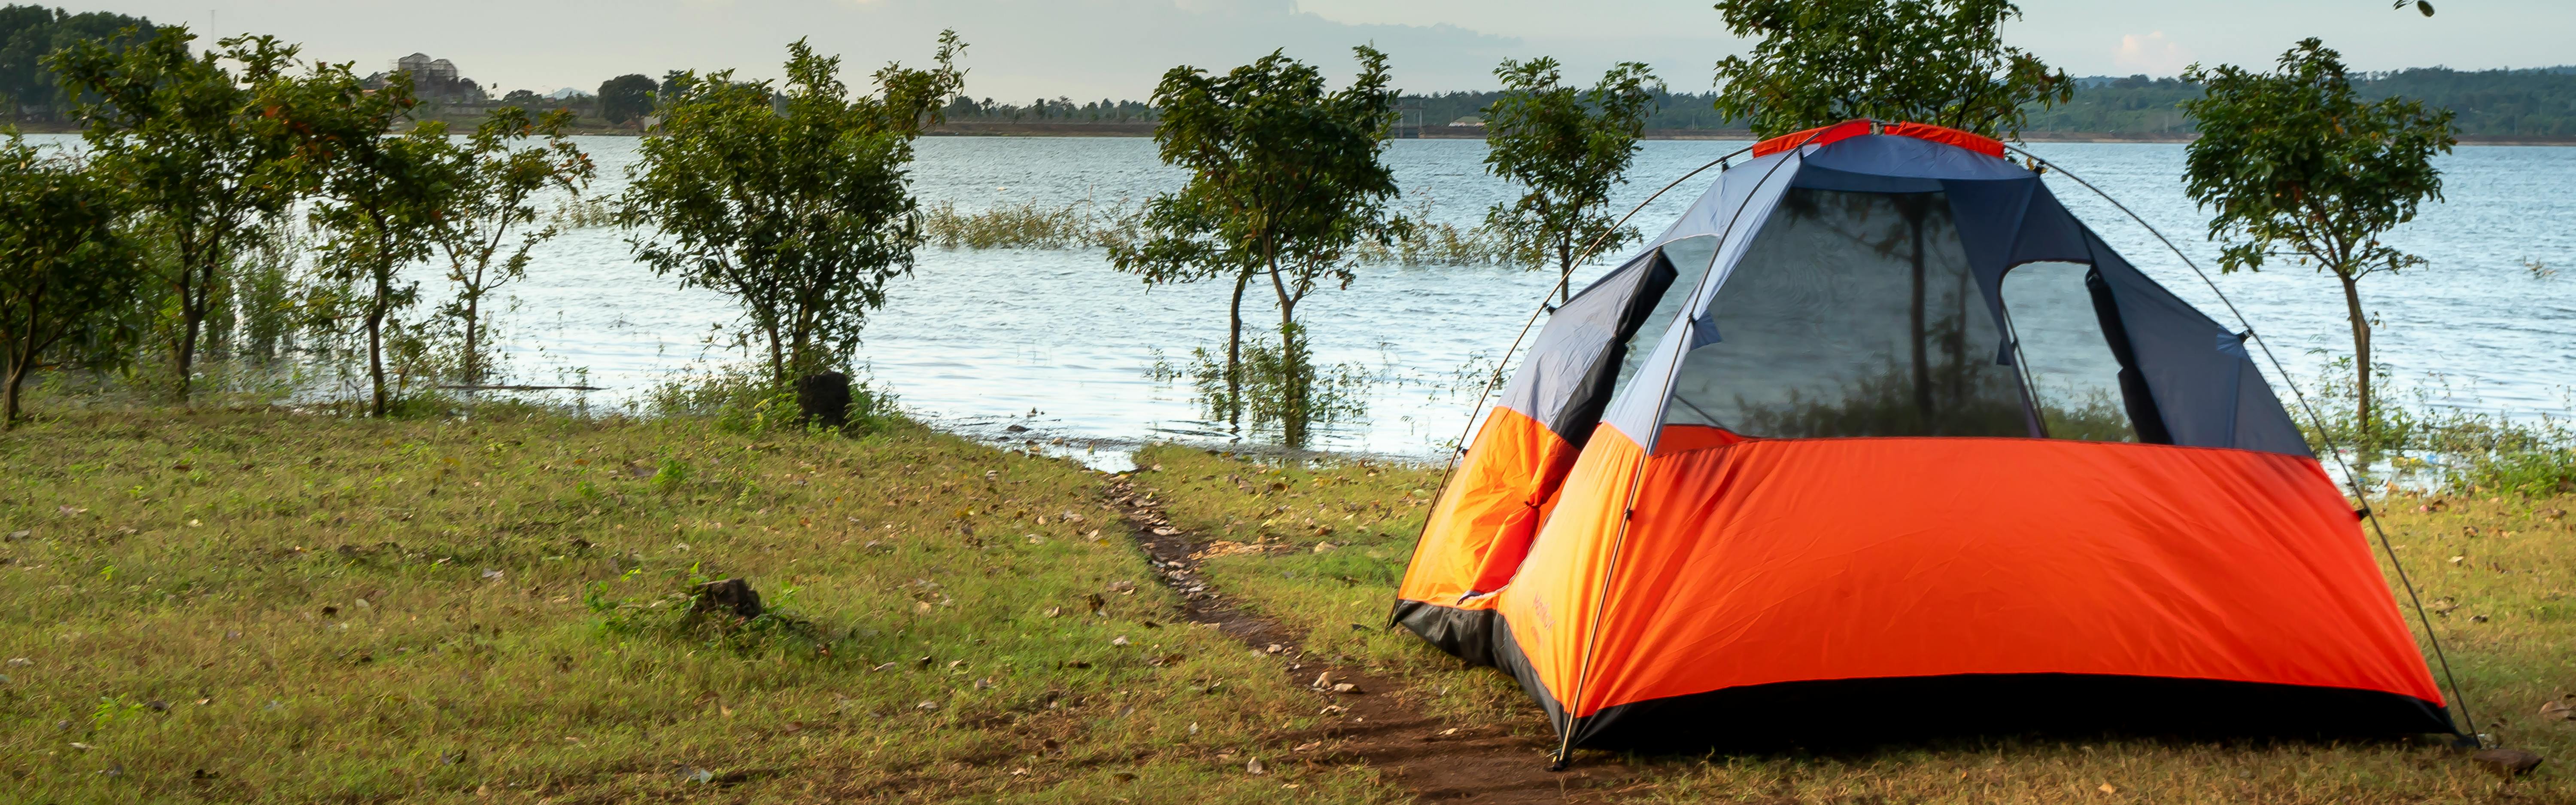 How much does camping cost? Here's how to do it on a budget